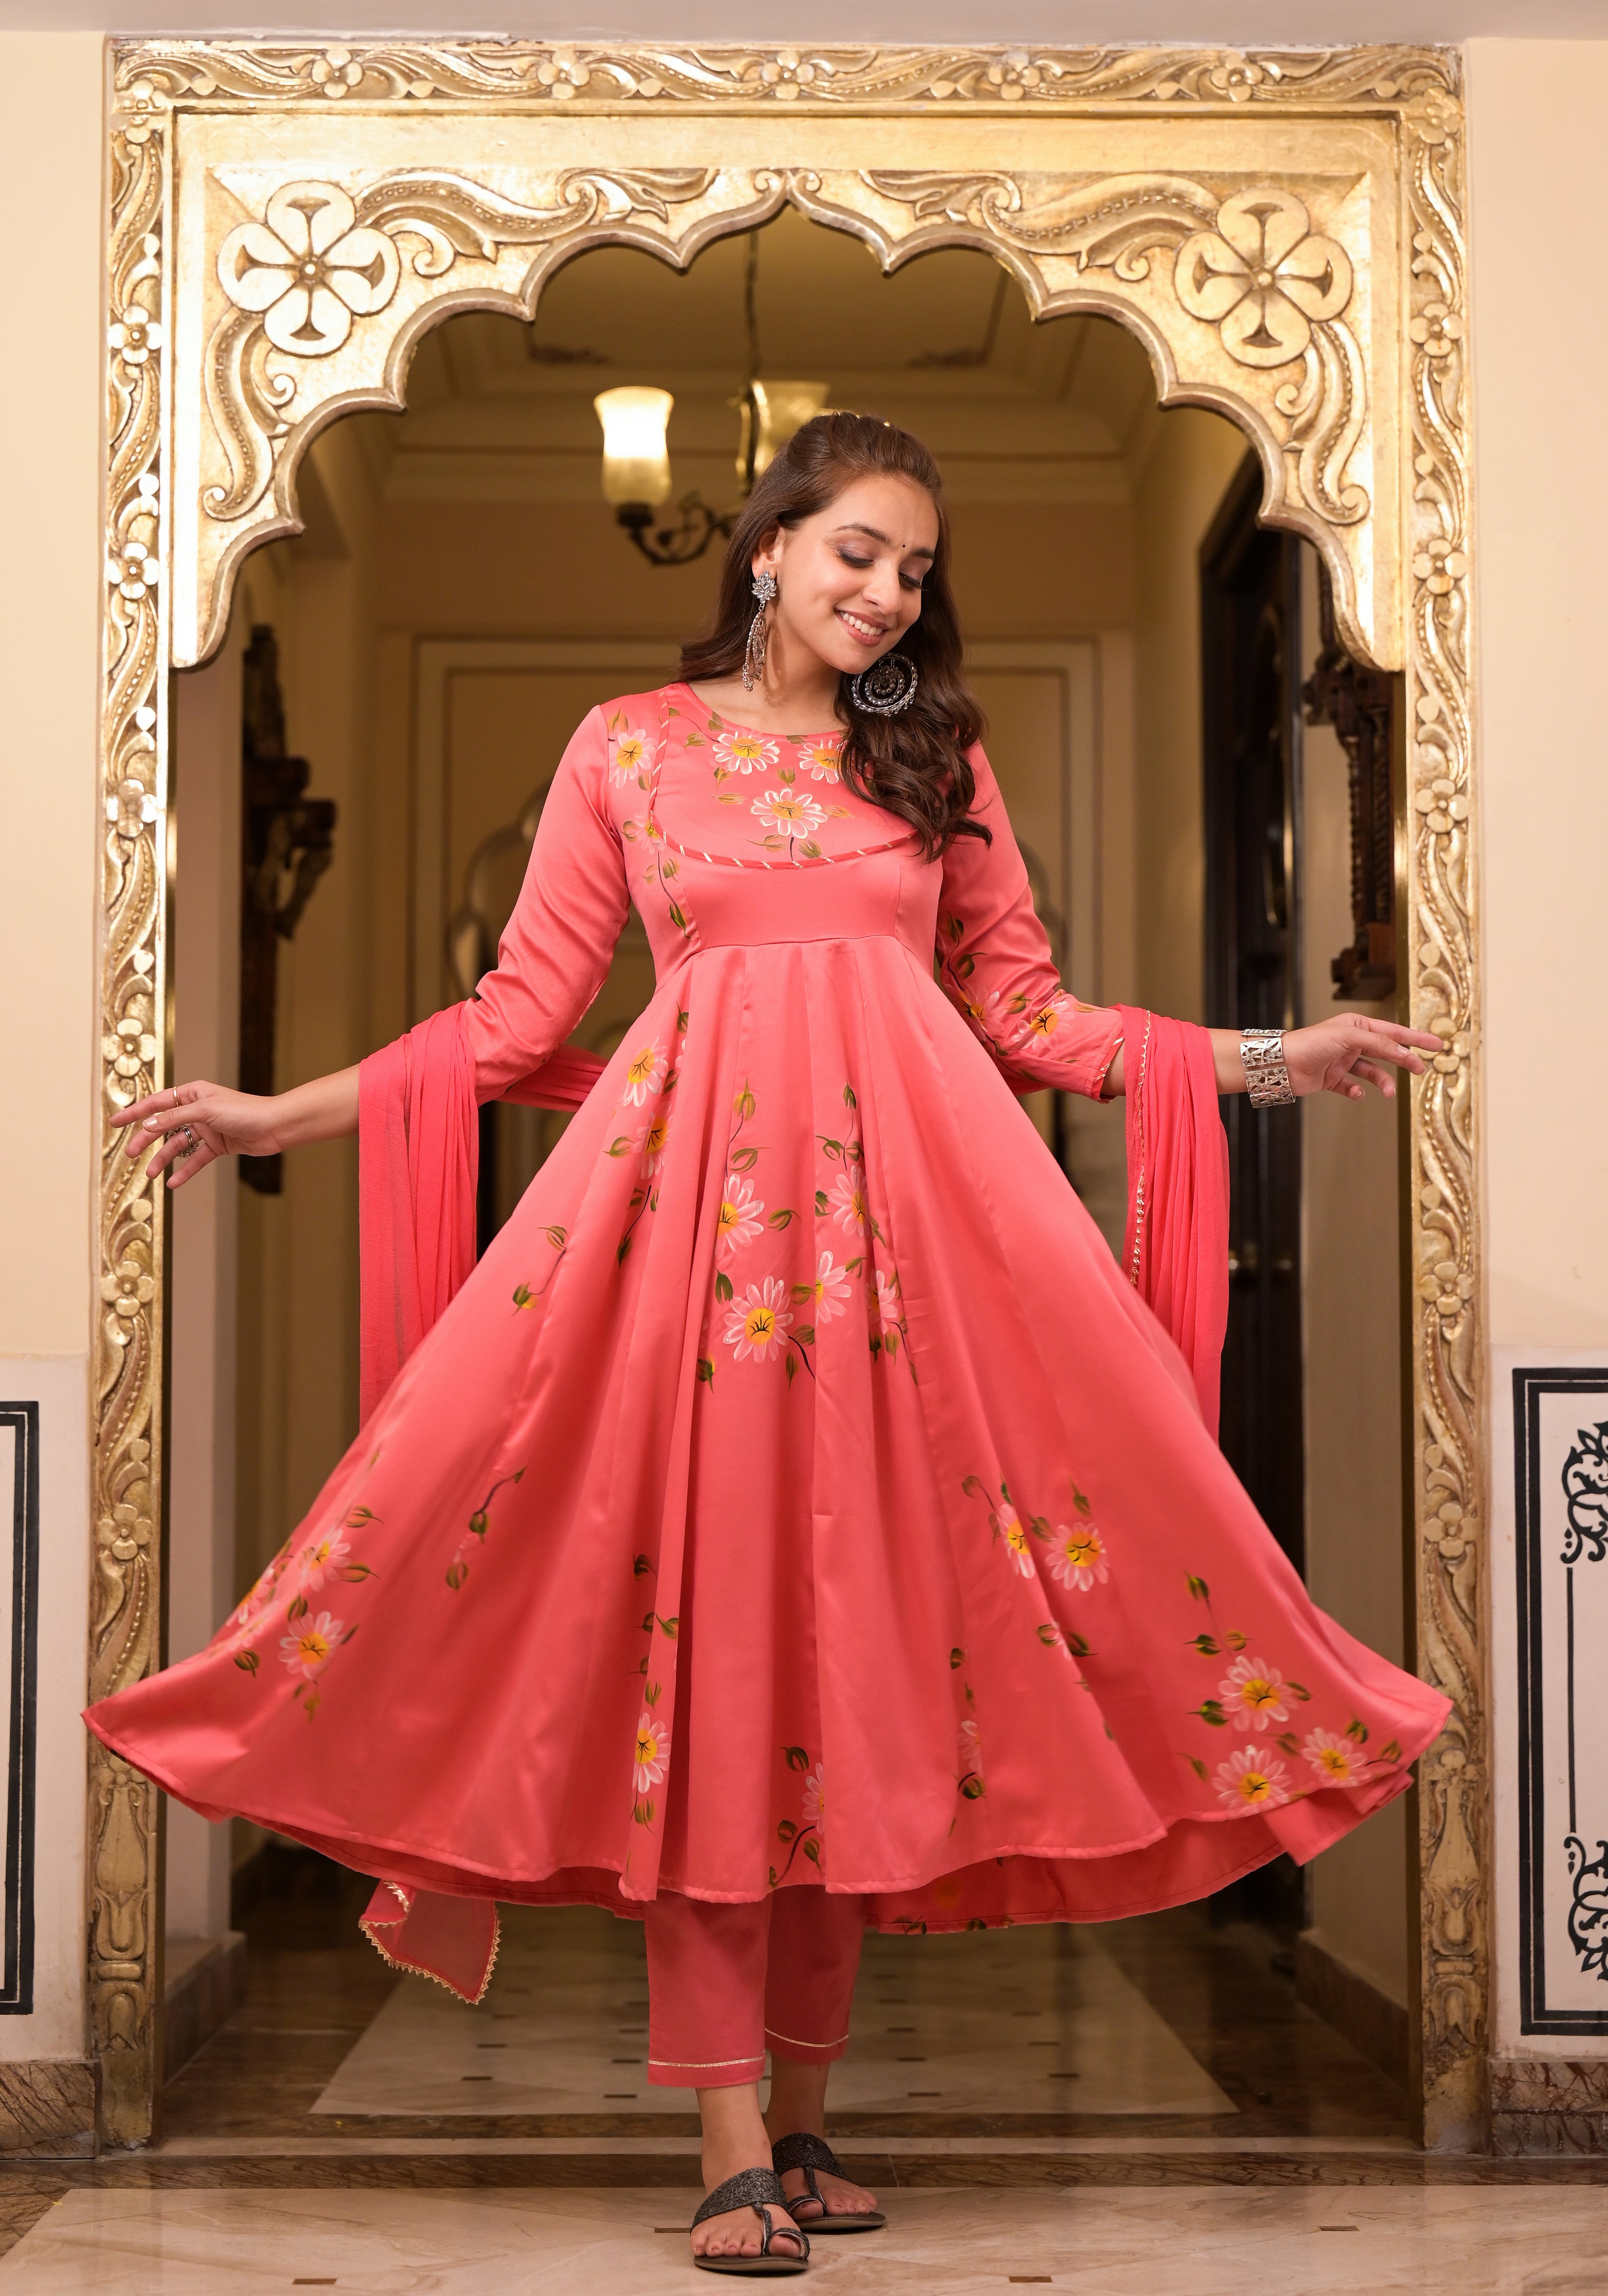 Dual toned flared anarkali dress with floral organza dupatta - Set Of Two  by The Anarkali Shop